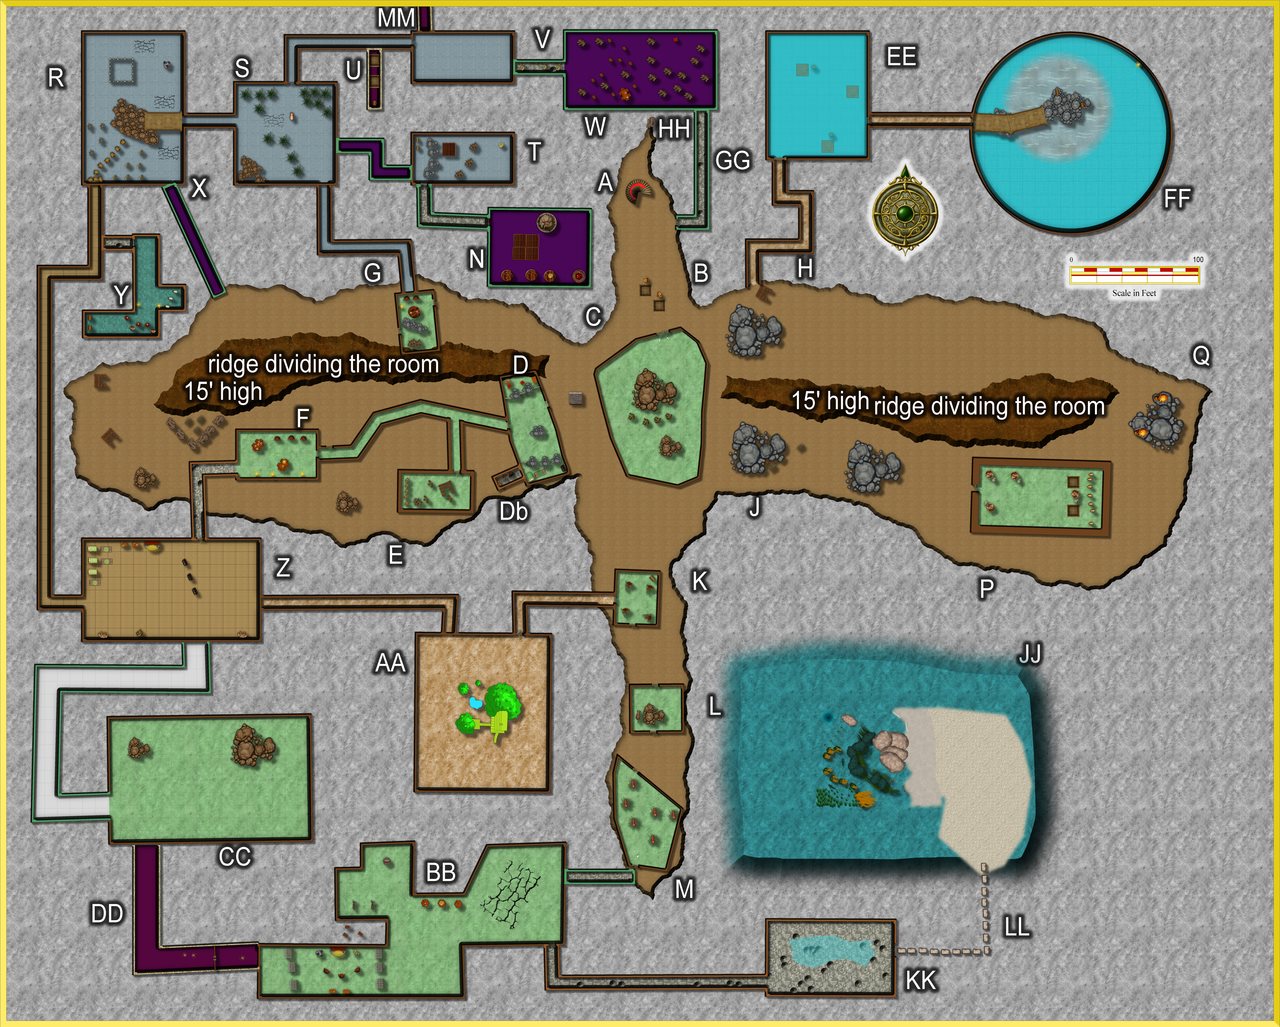 Nibirum Map: dungeon of the dragon by JimP